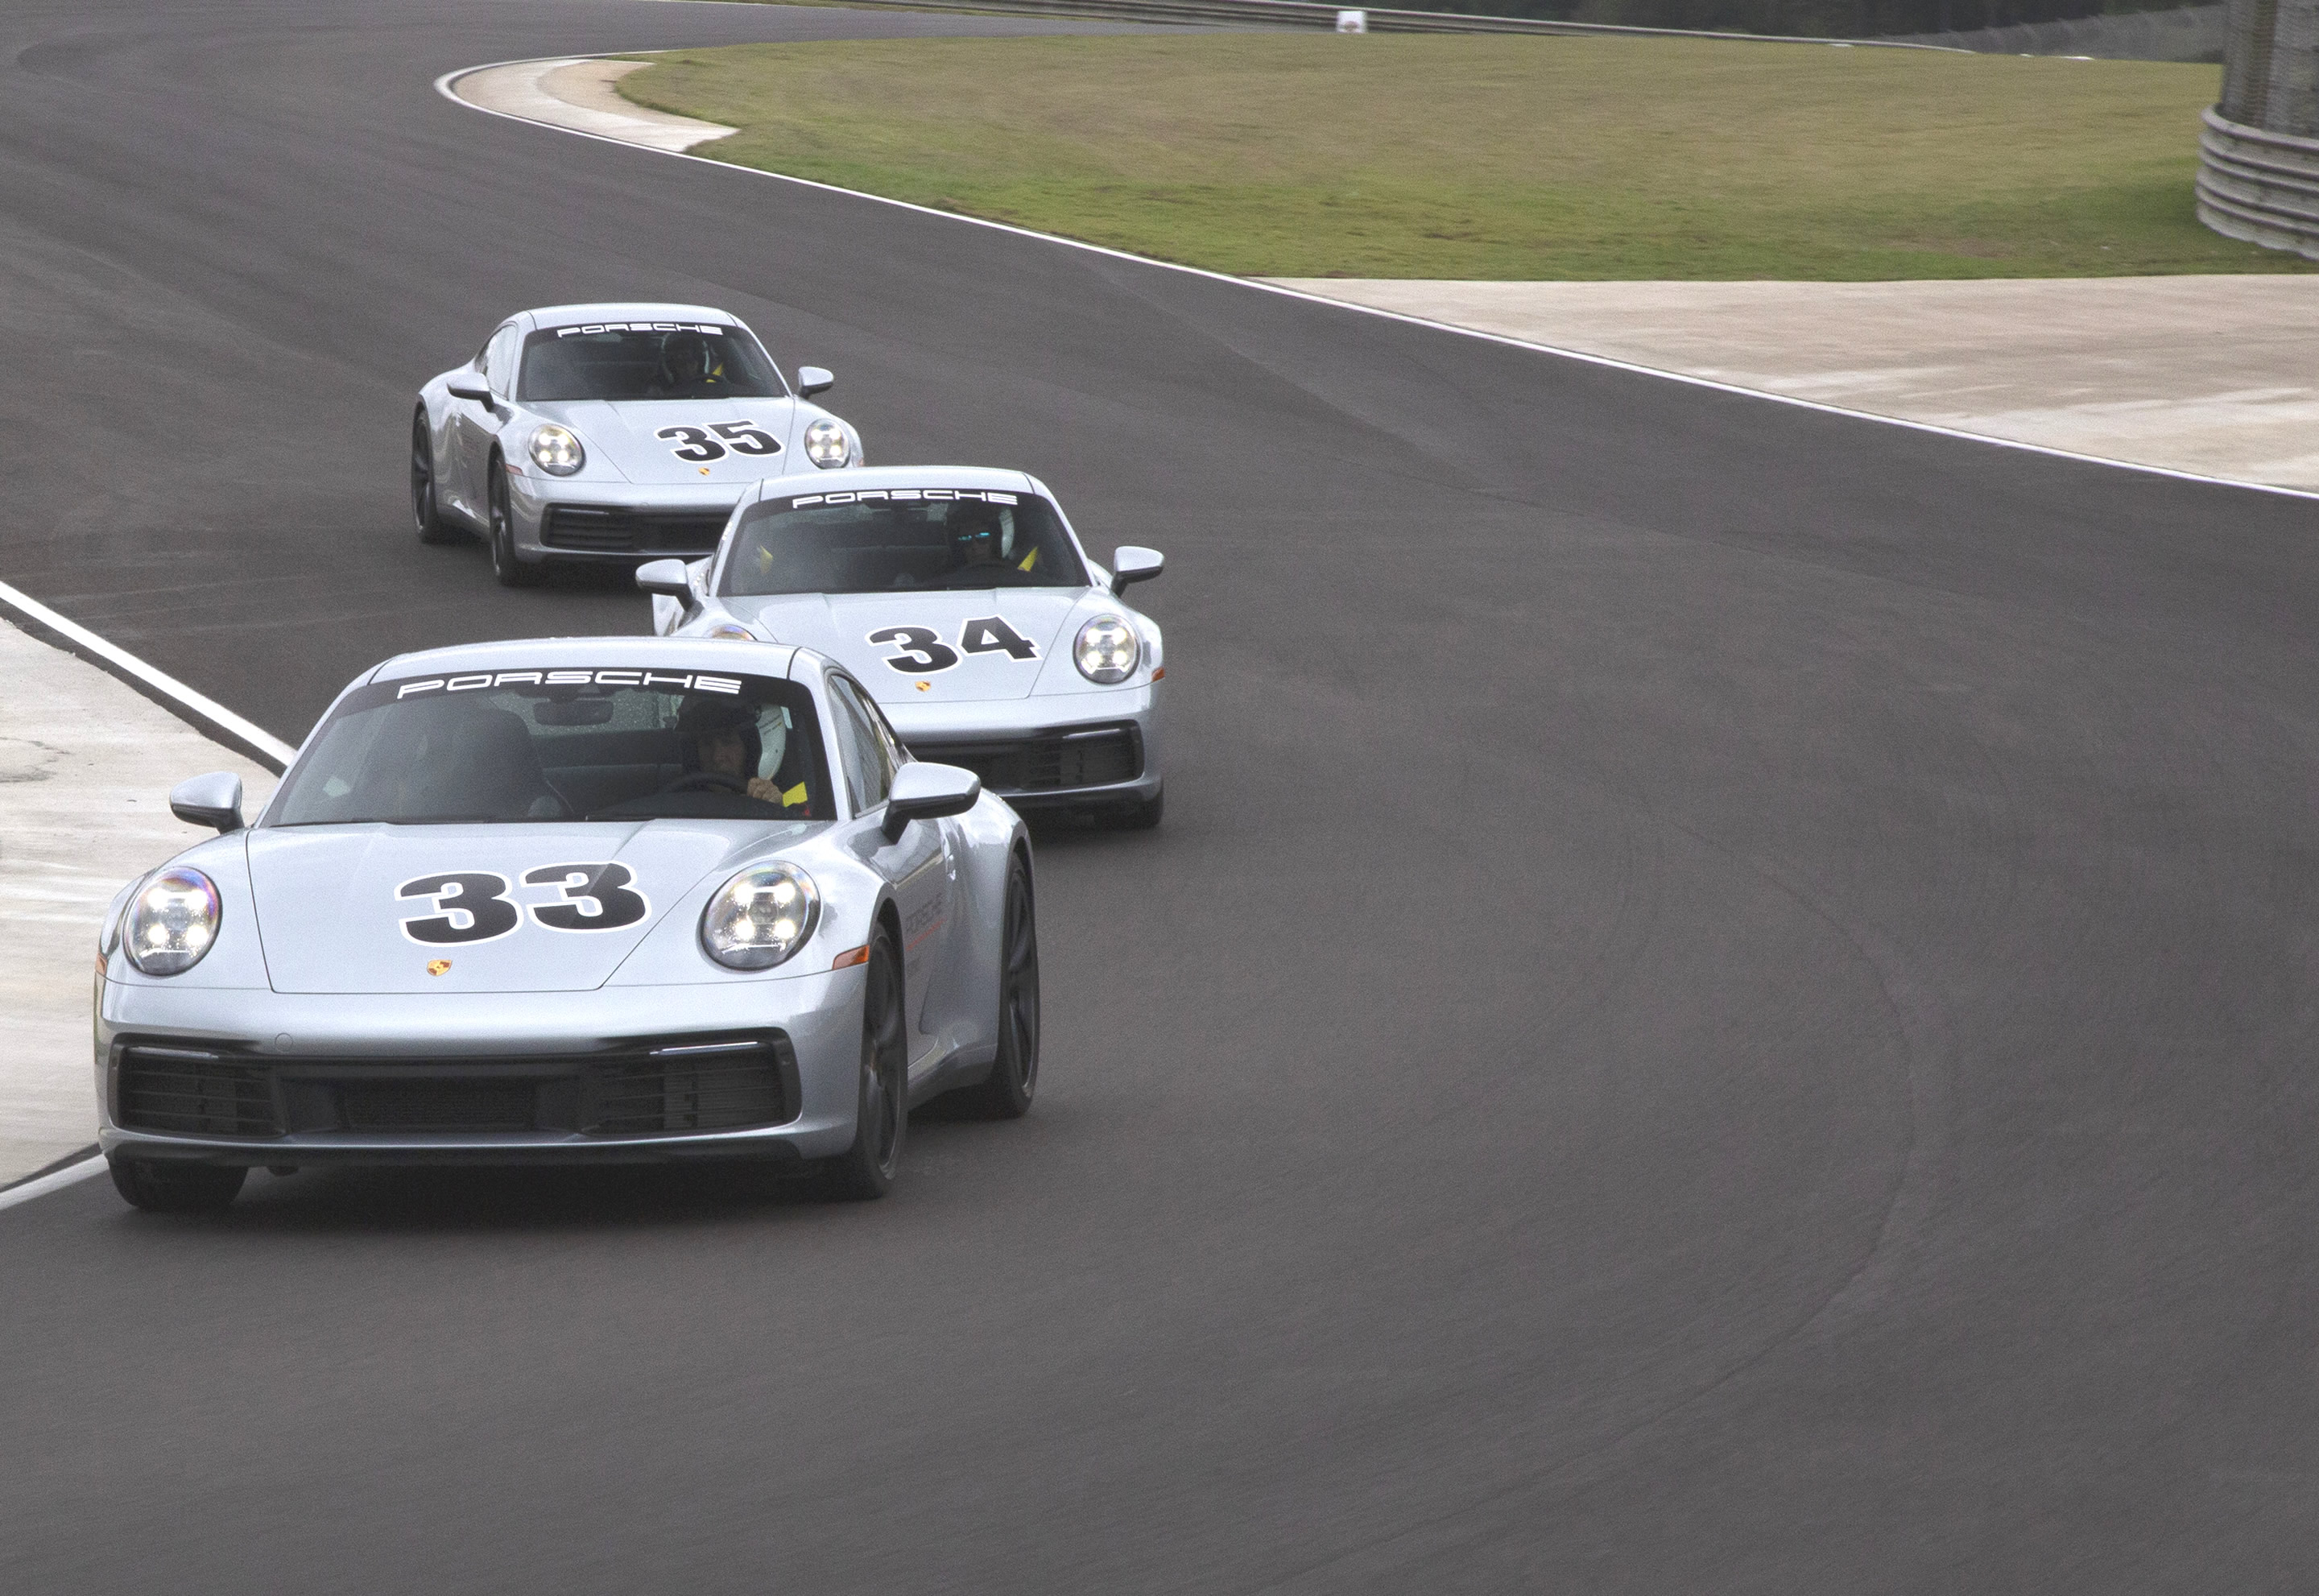 Level one courses, intro background - blue porshe cars on track